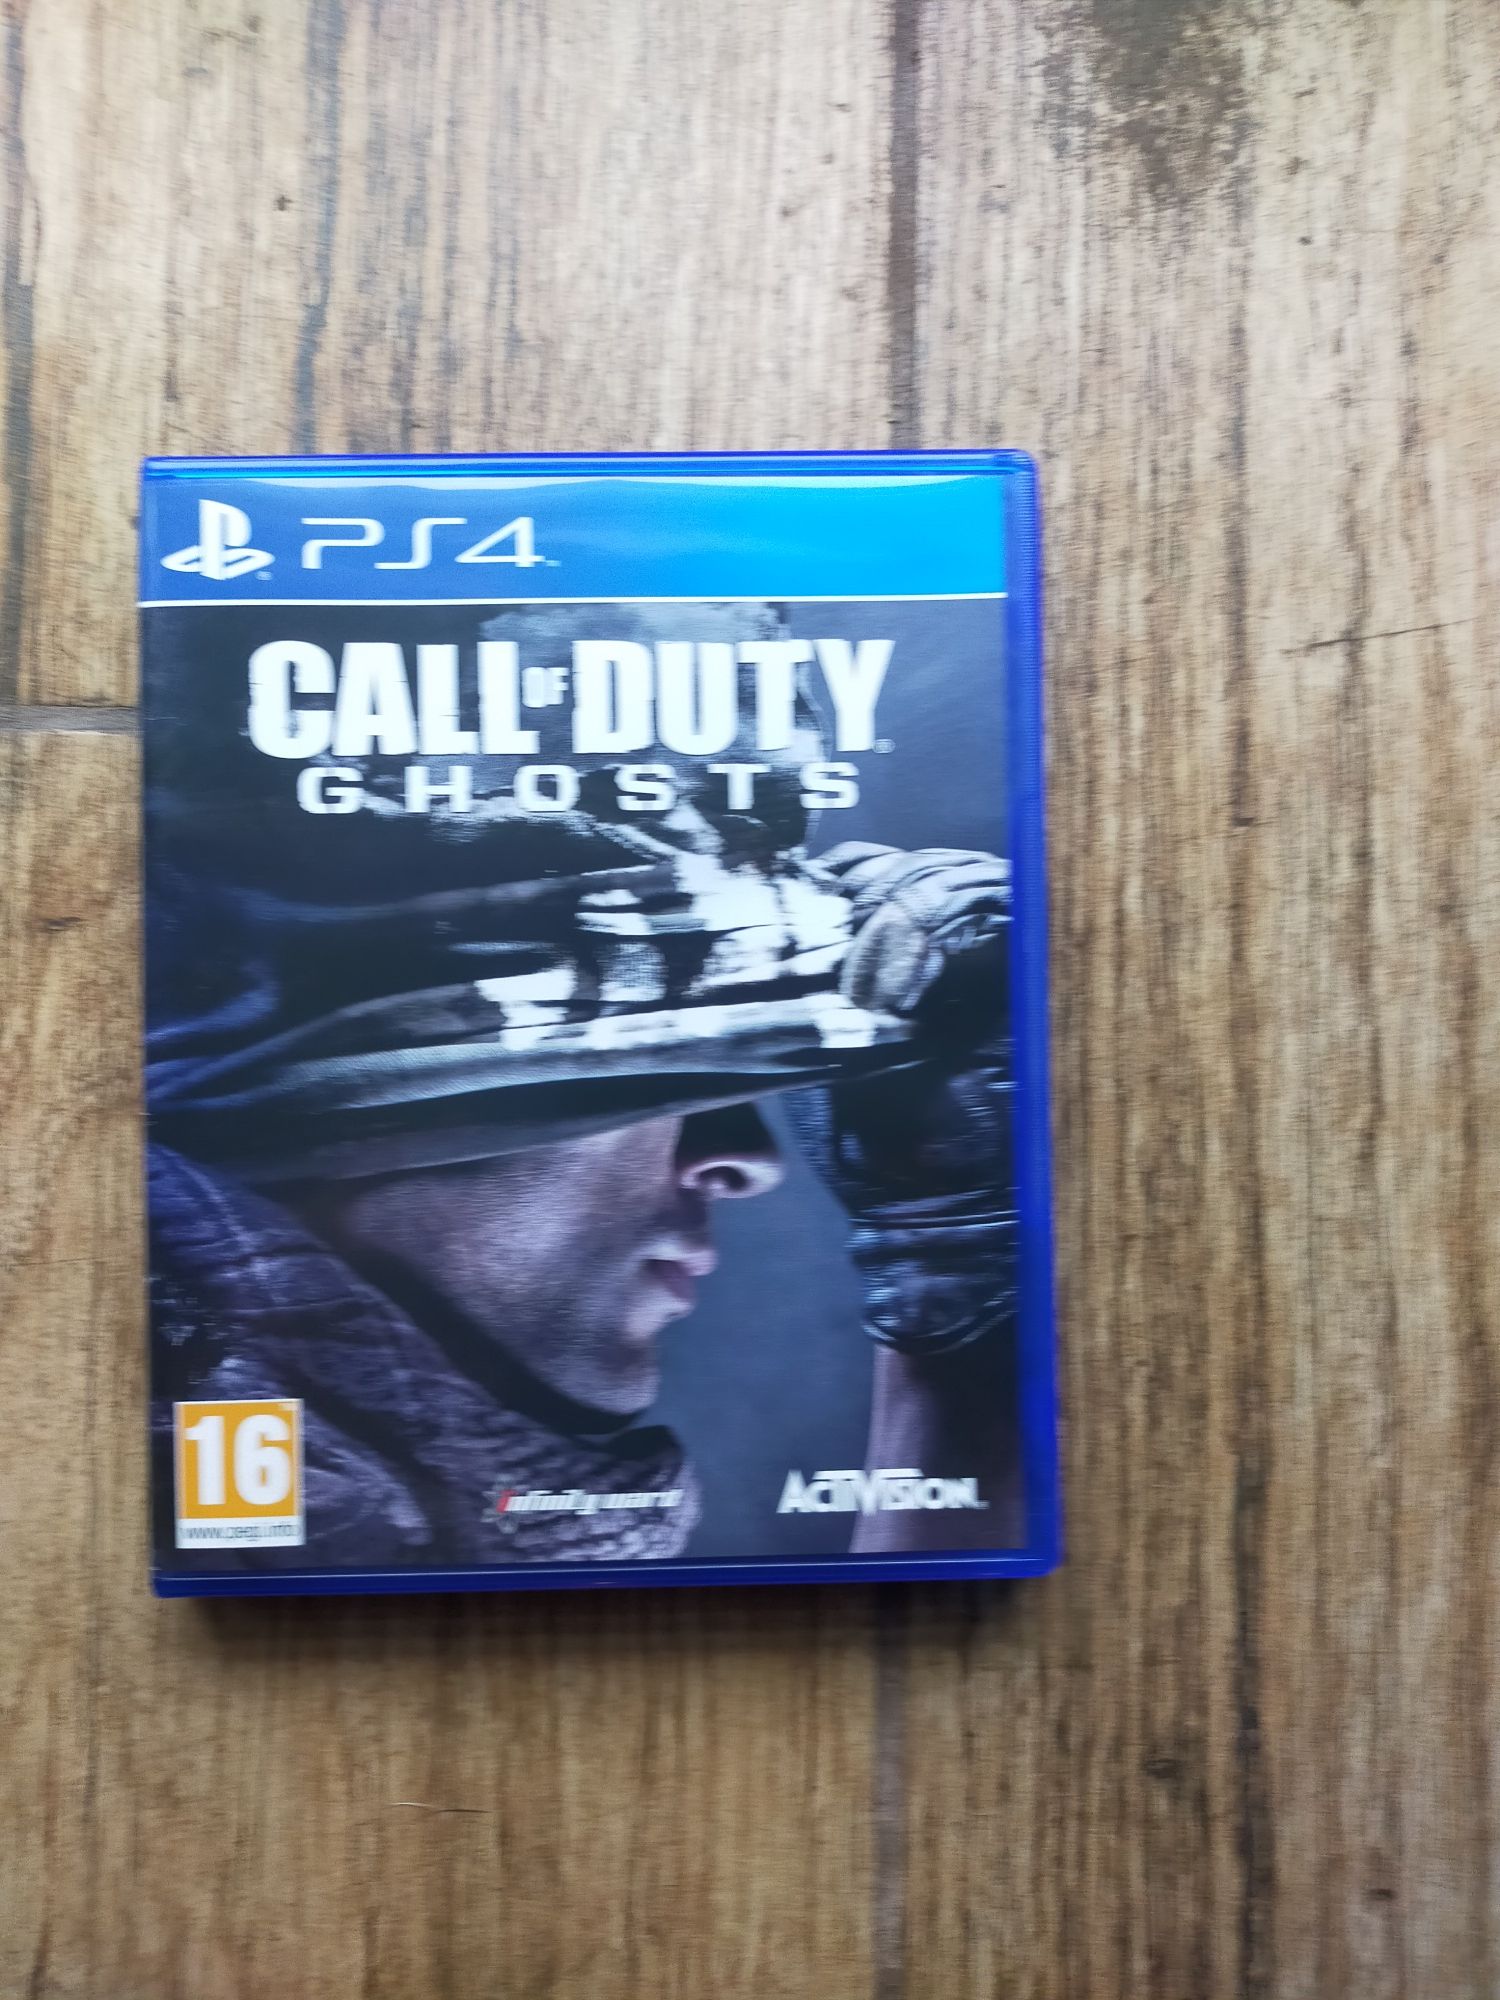 Call of duty ghosts PS 4